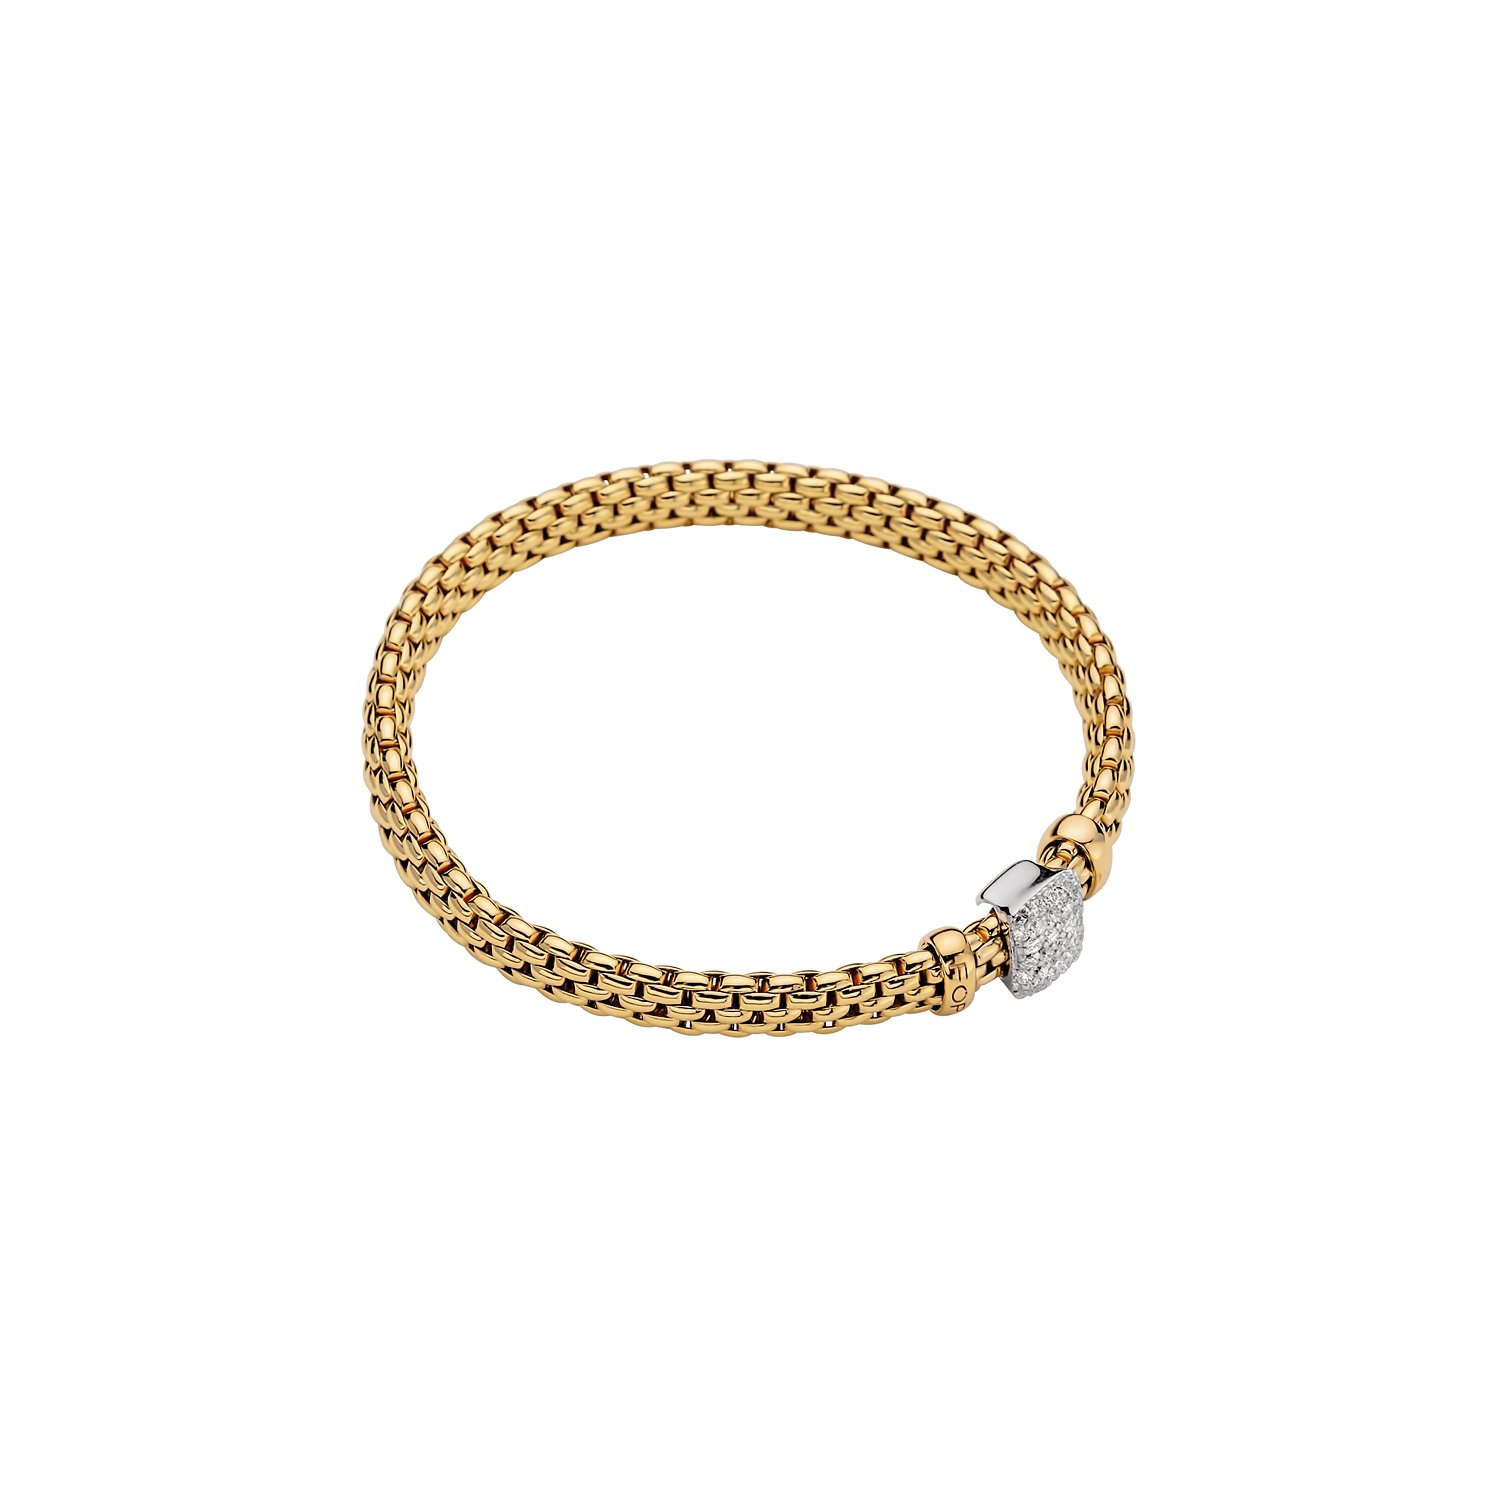 Vendome Bracelet in 18kt Yellow Gold with 1 White Gold and White Diamond Square Pave Element - 6.9mm - Size L